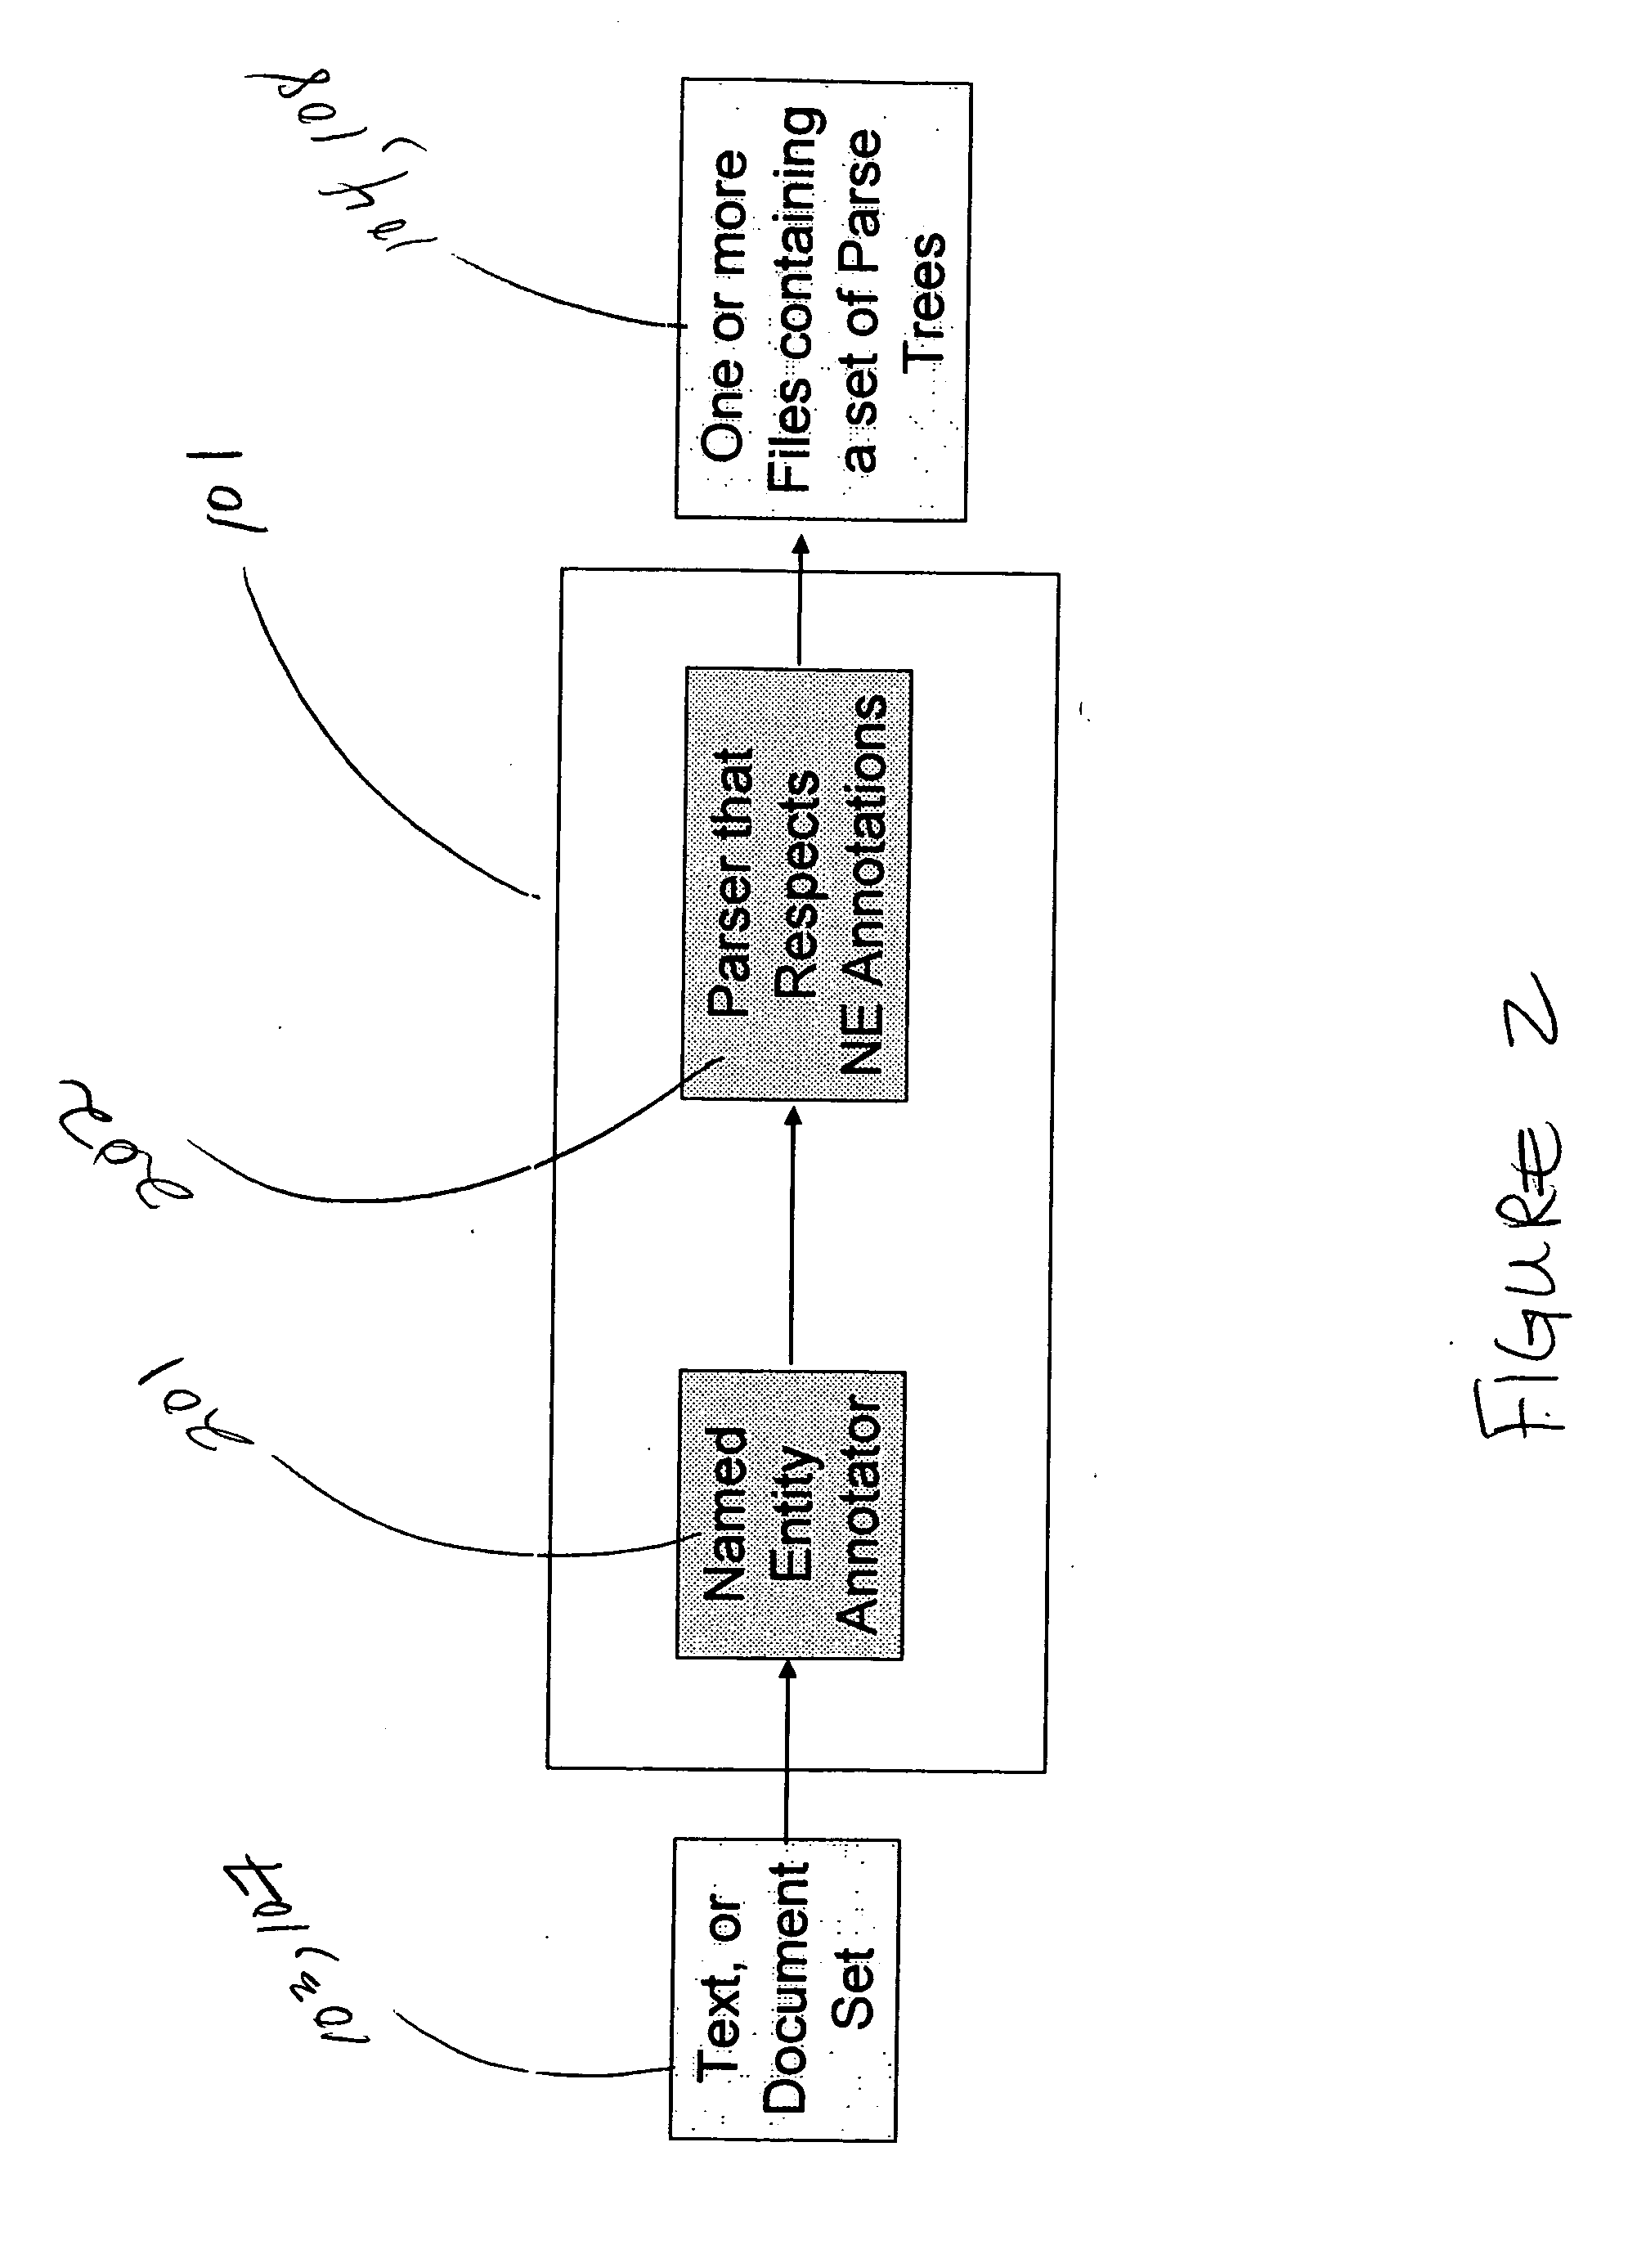 Method and system for extracting information from unstructured text using symbolic machine learning